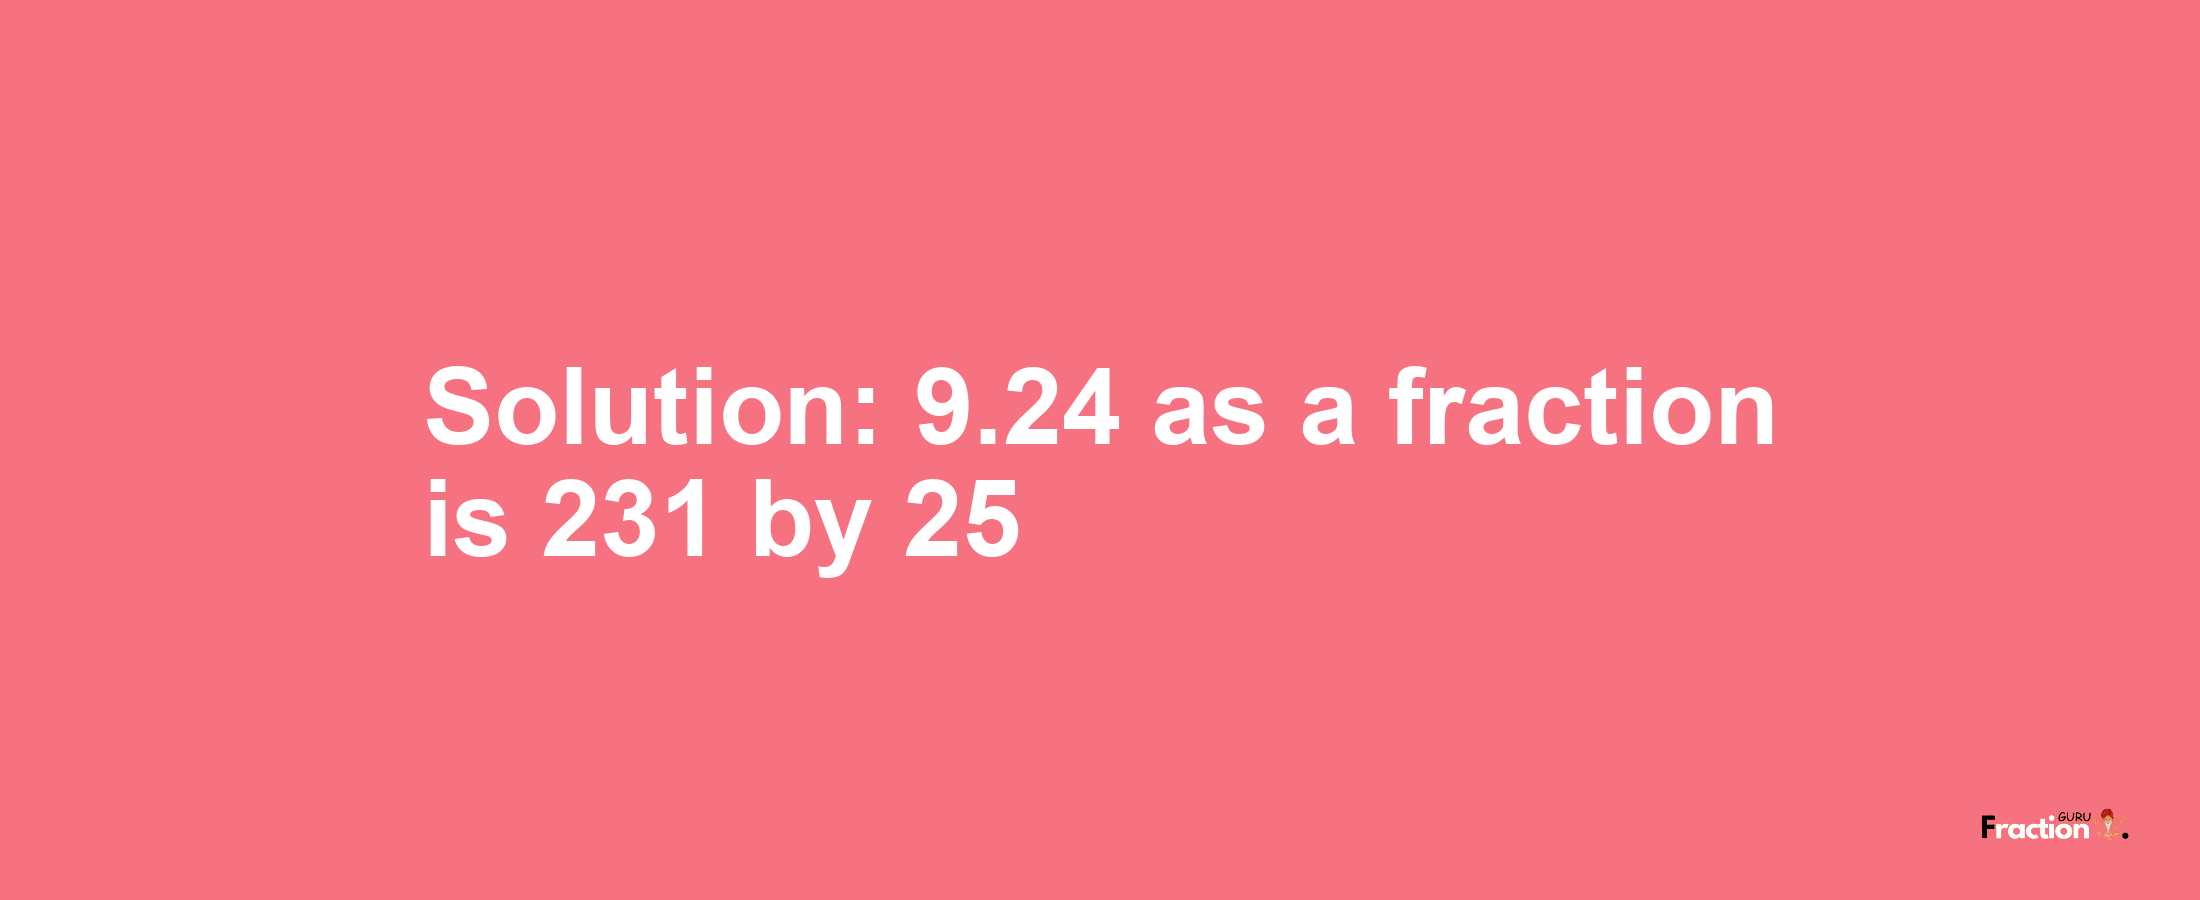 Solution:9.24 as a fraction is 231/25